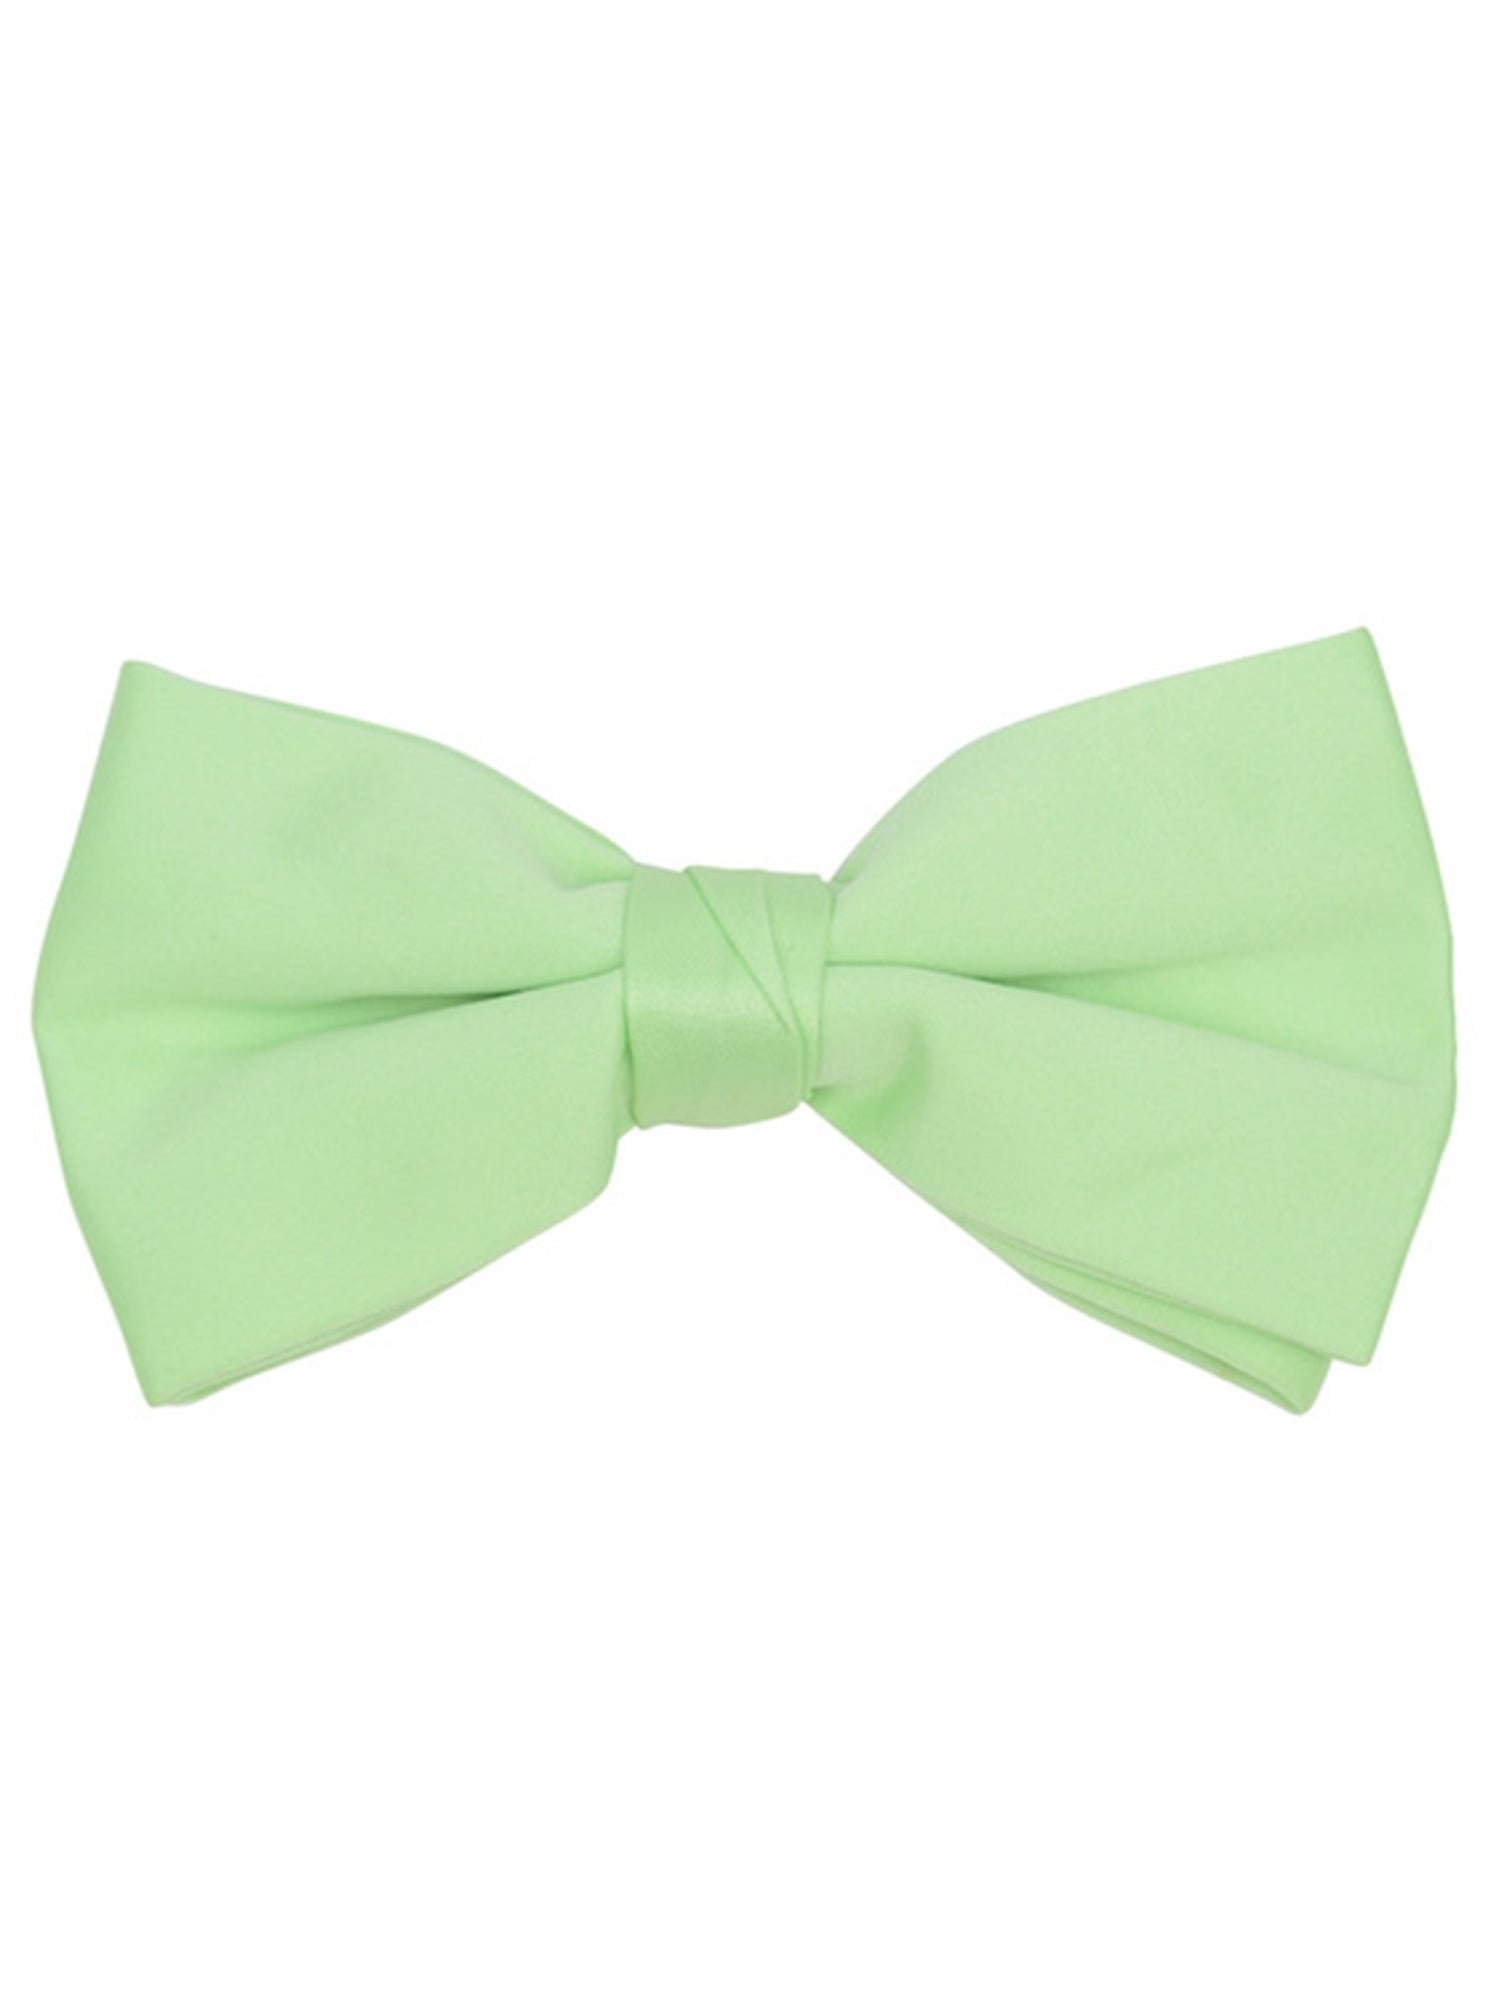 Men's Pre-tied Clip On Bow Tie - Formal Tuxedo Solid Color Men's Solid Color Bow Tie TheDapperTie Lime One Size 